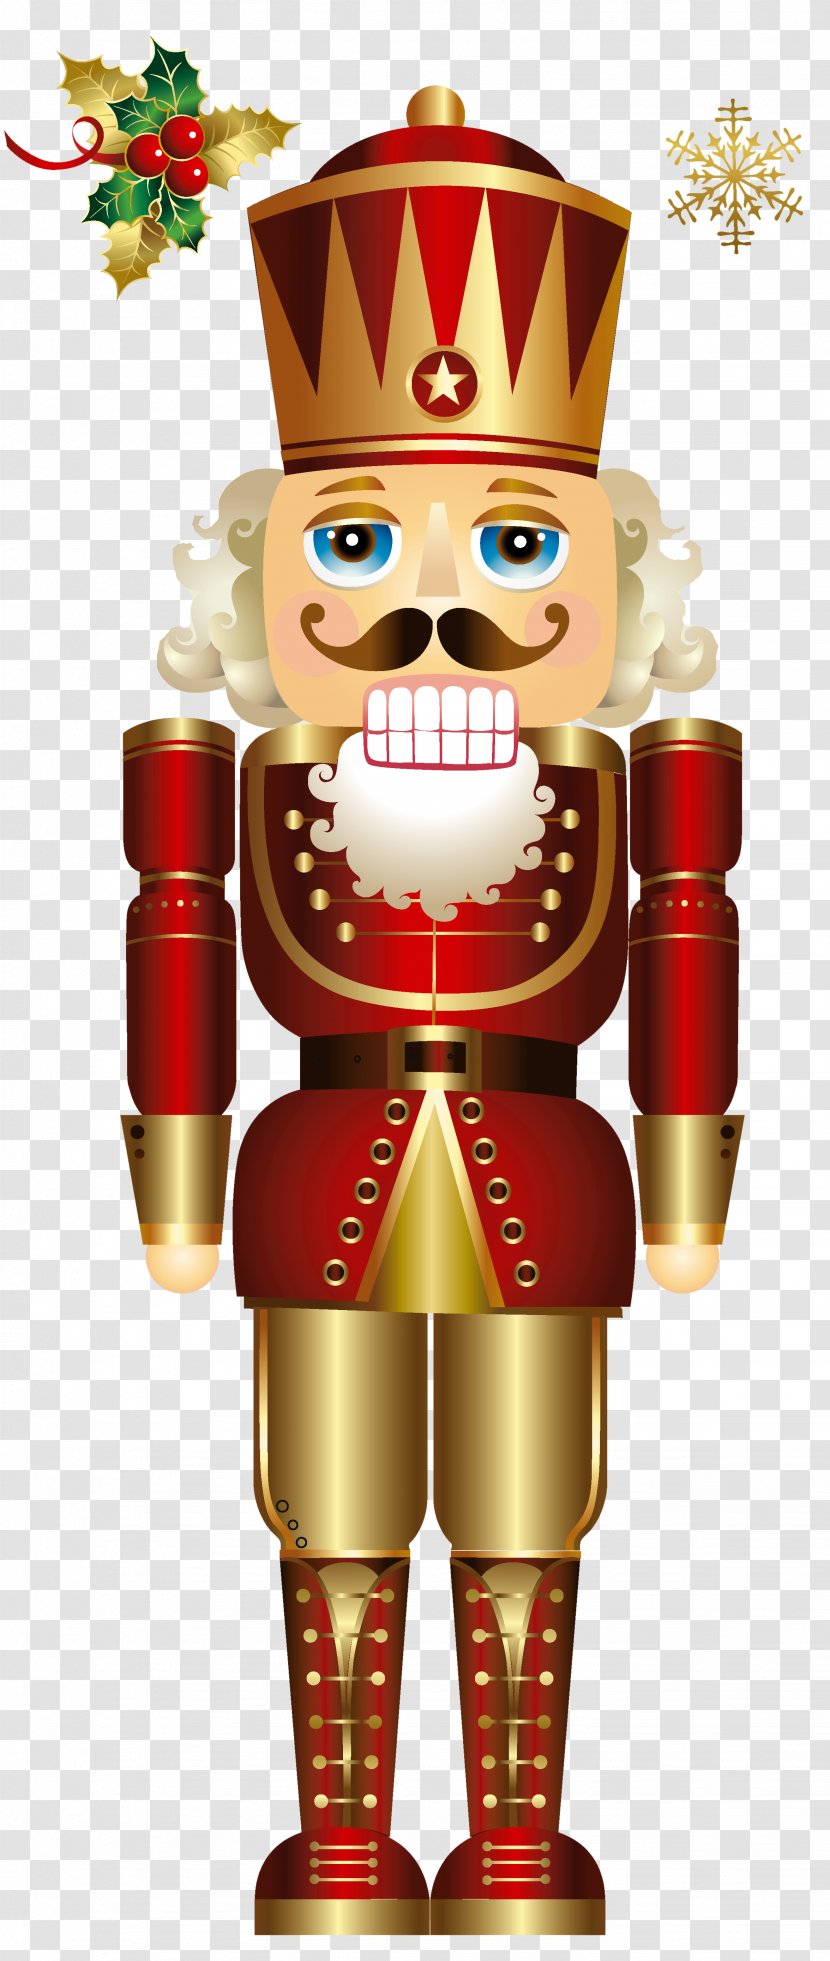 The Nutcracker And Mouse King Clip Art - Decorative - Christmas Clipart Transparent PNG